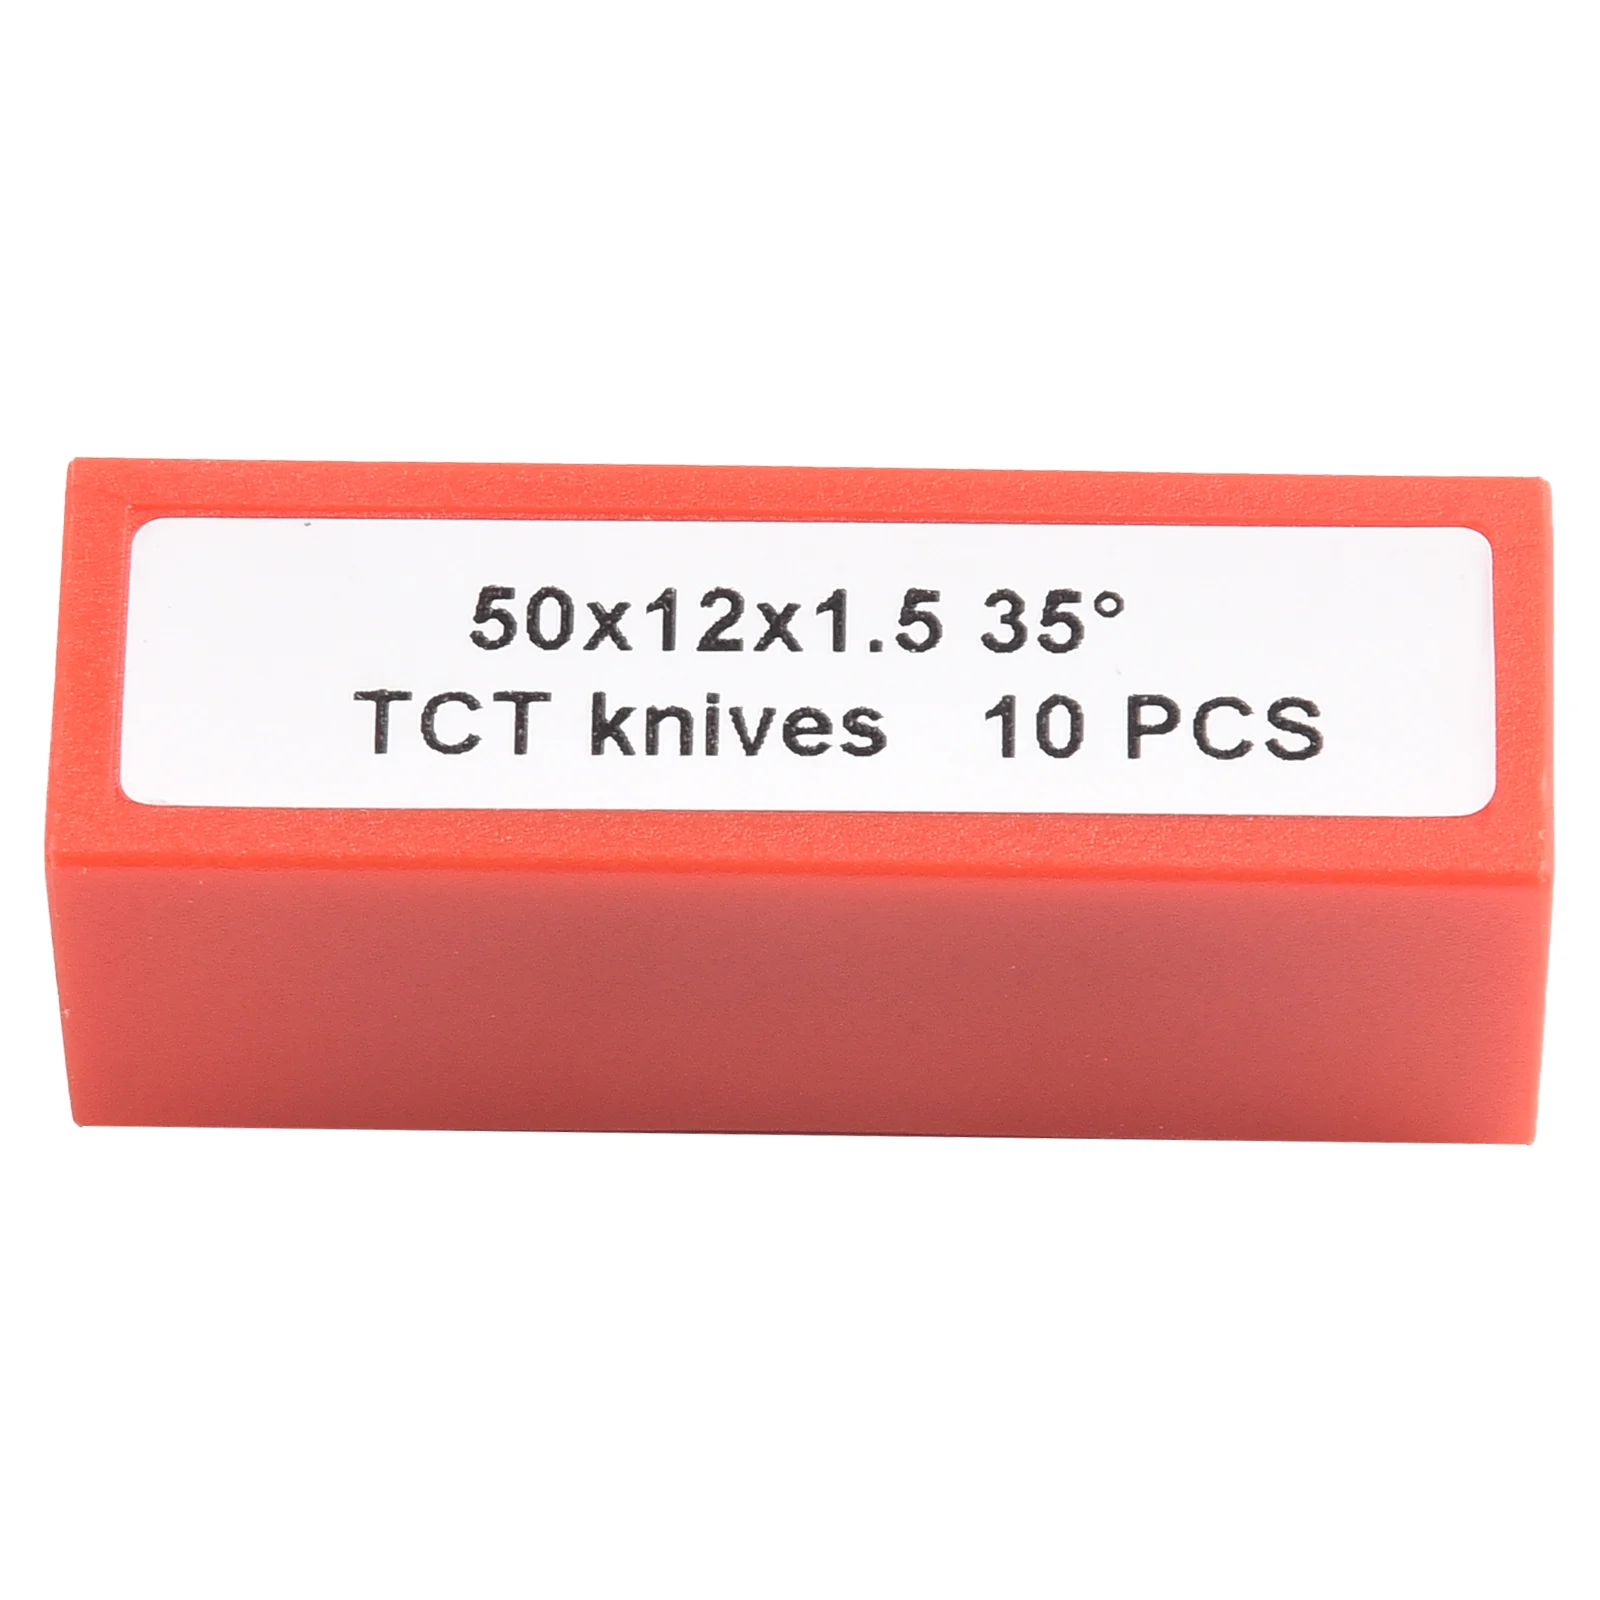 

Machinery & Accessories Turning Tool Square 50x 12 X1.5mm Carbide Inserts Cutter Blades Paint Scraper Blades Woodworking 10pcs